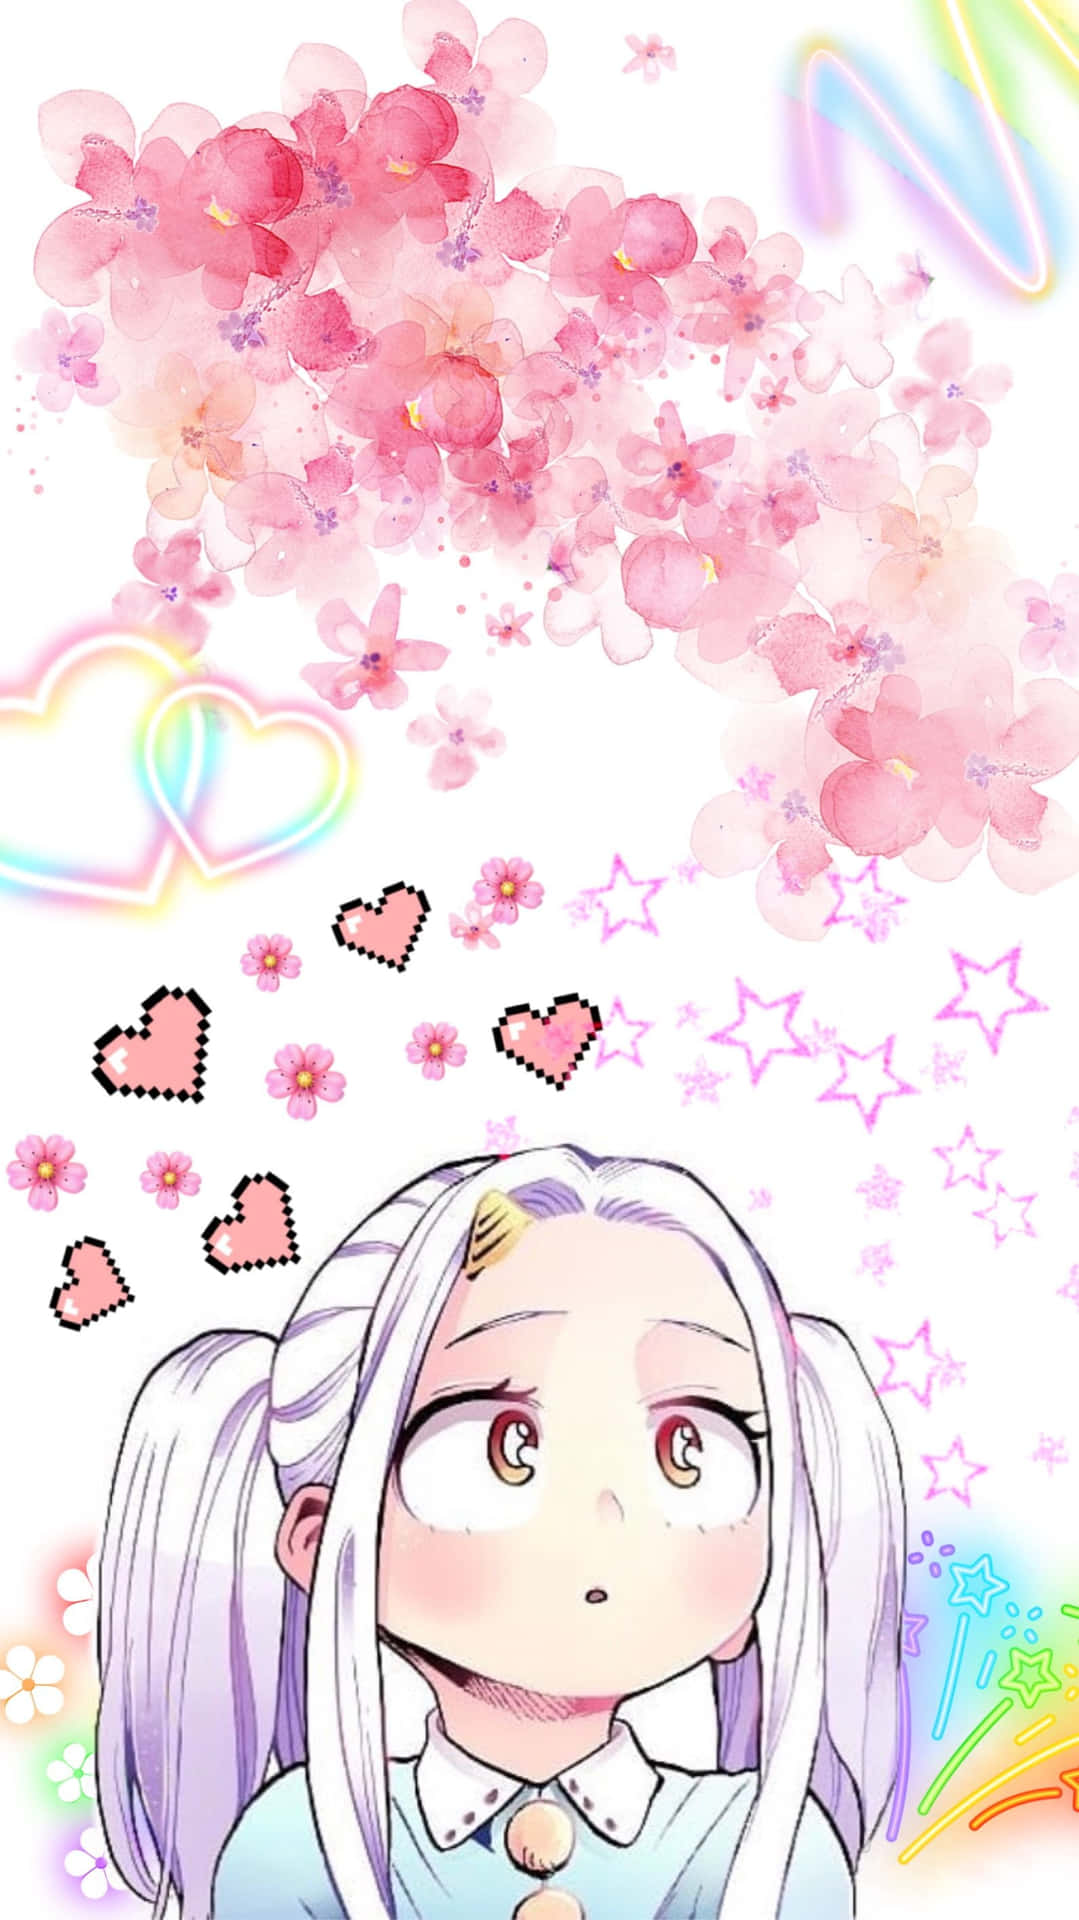 Cute Eri With Girly Decorations Background